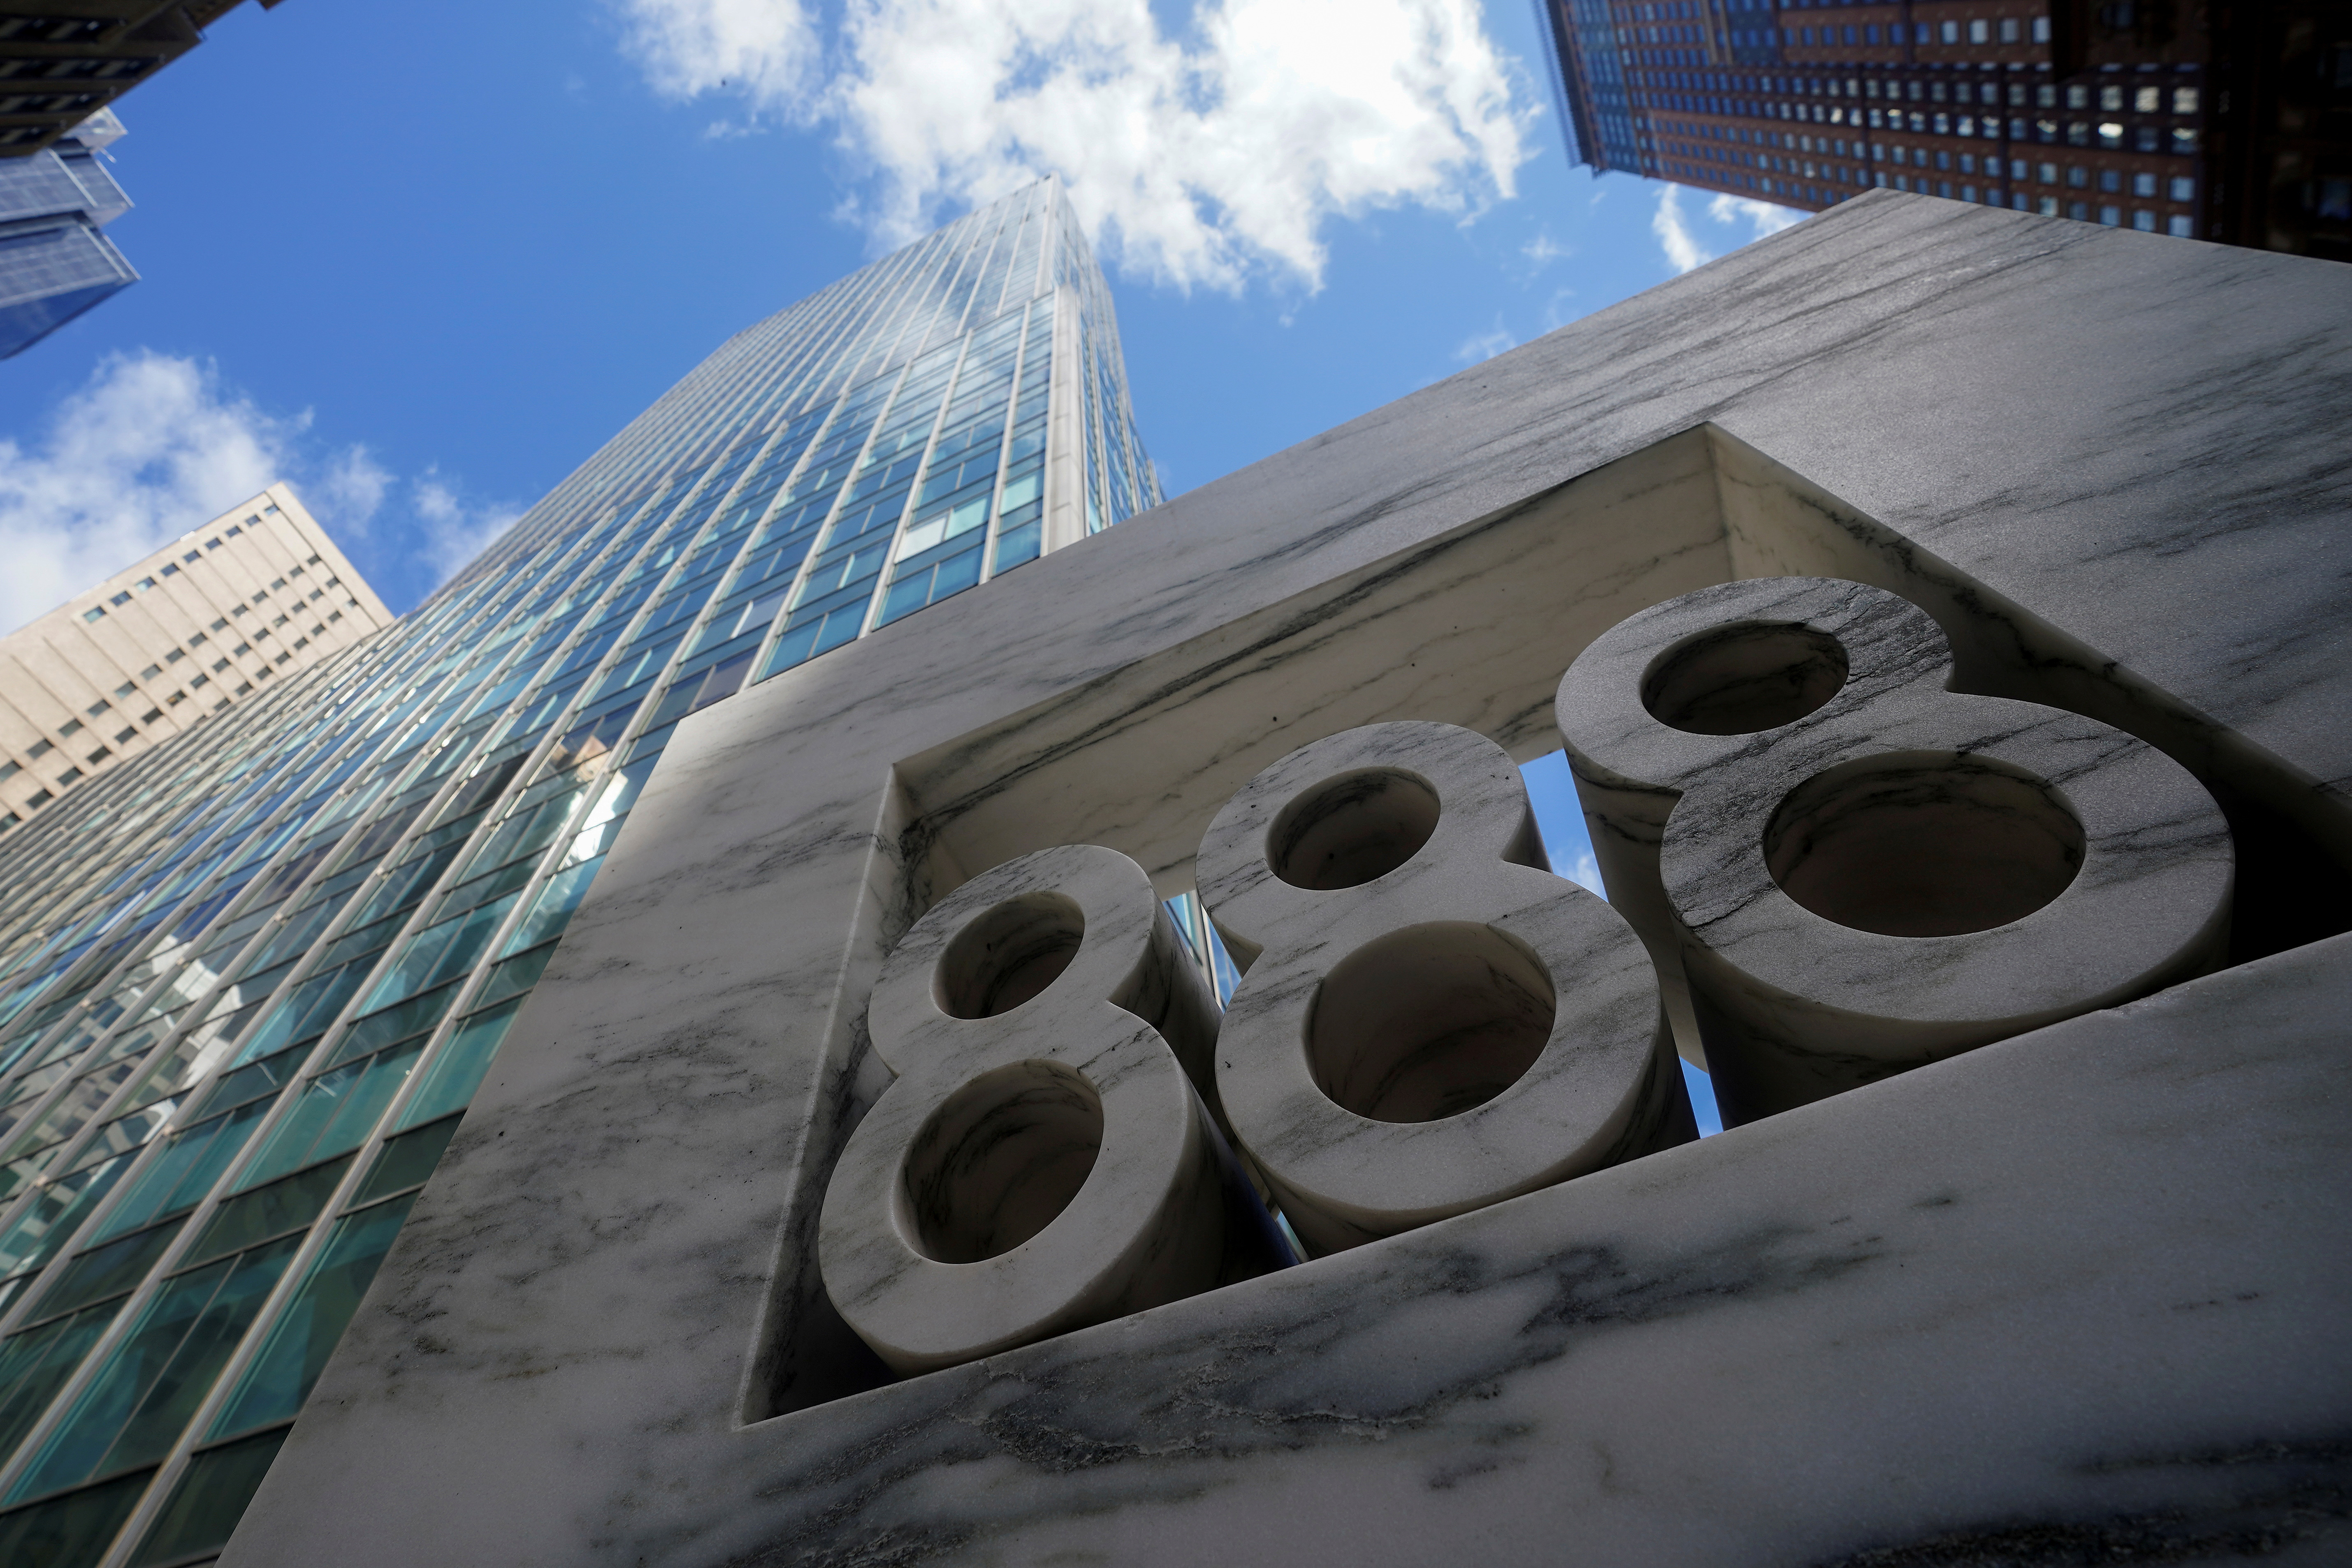 888 7th Ave, a building that reportedly houses Archegos Capital, is pictured in New York City